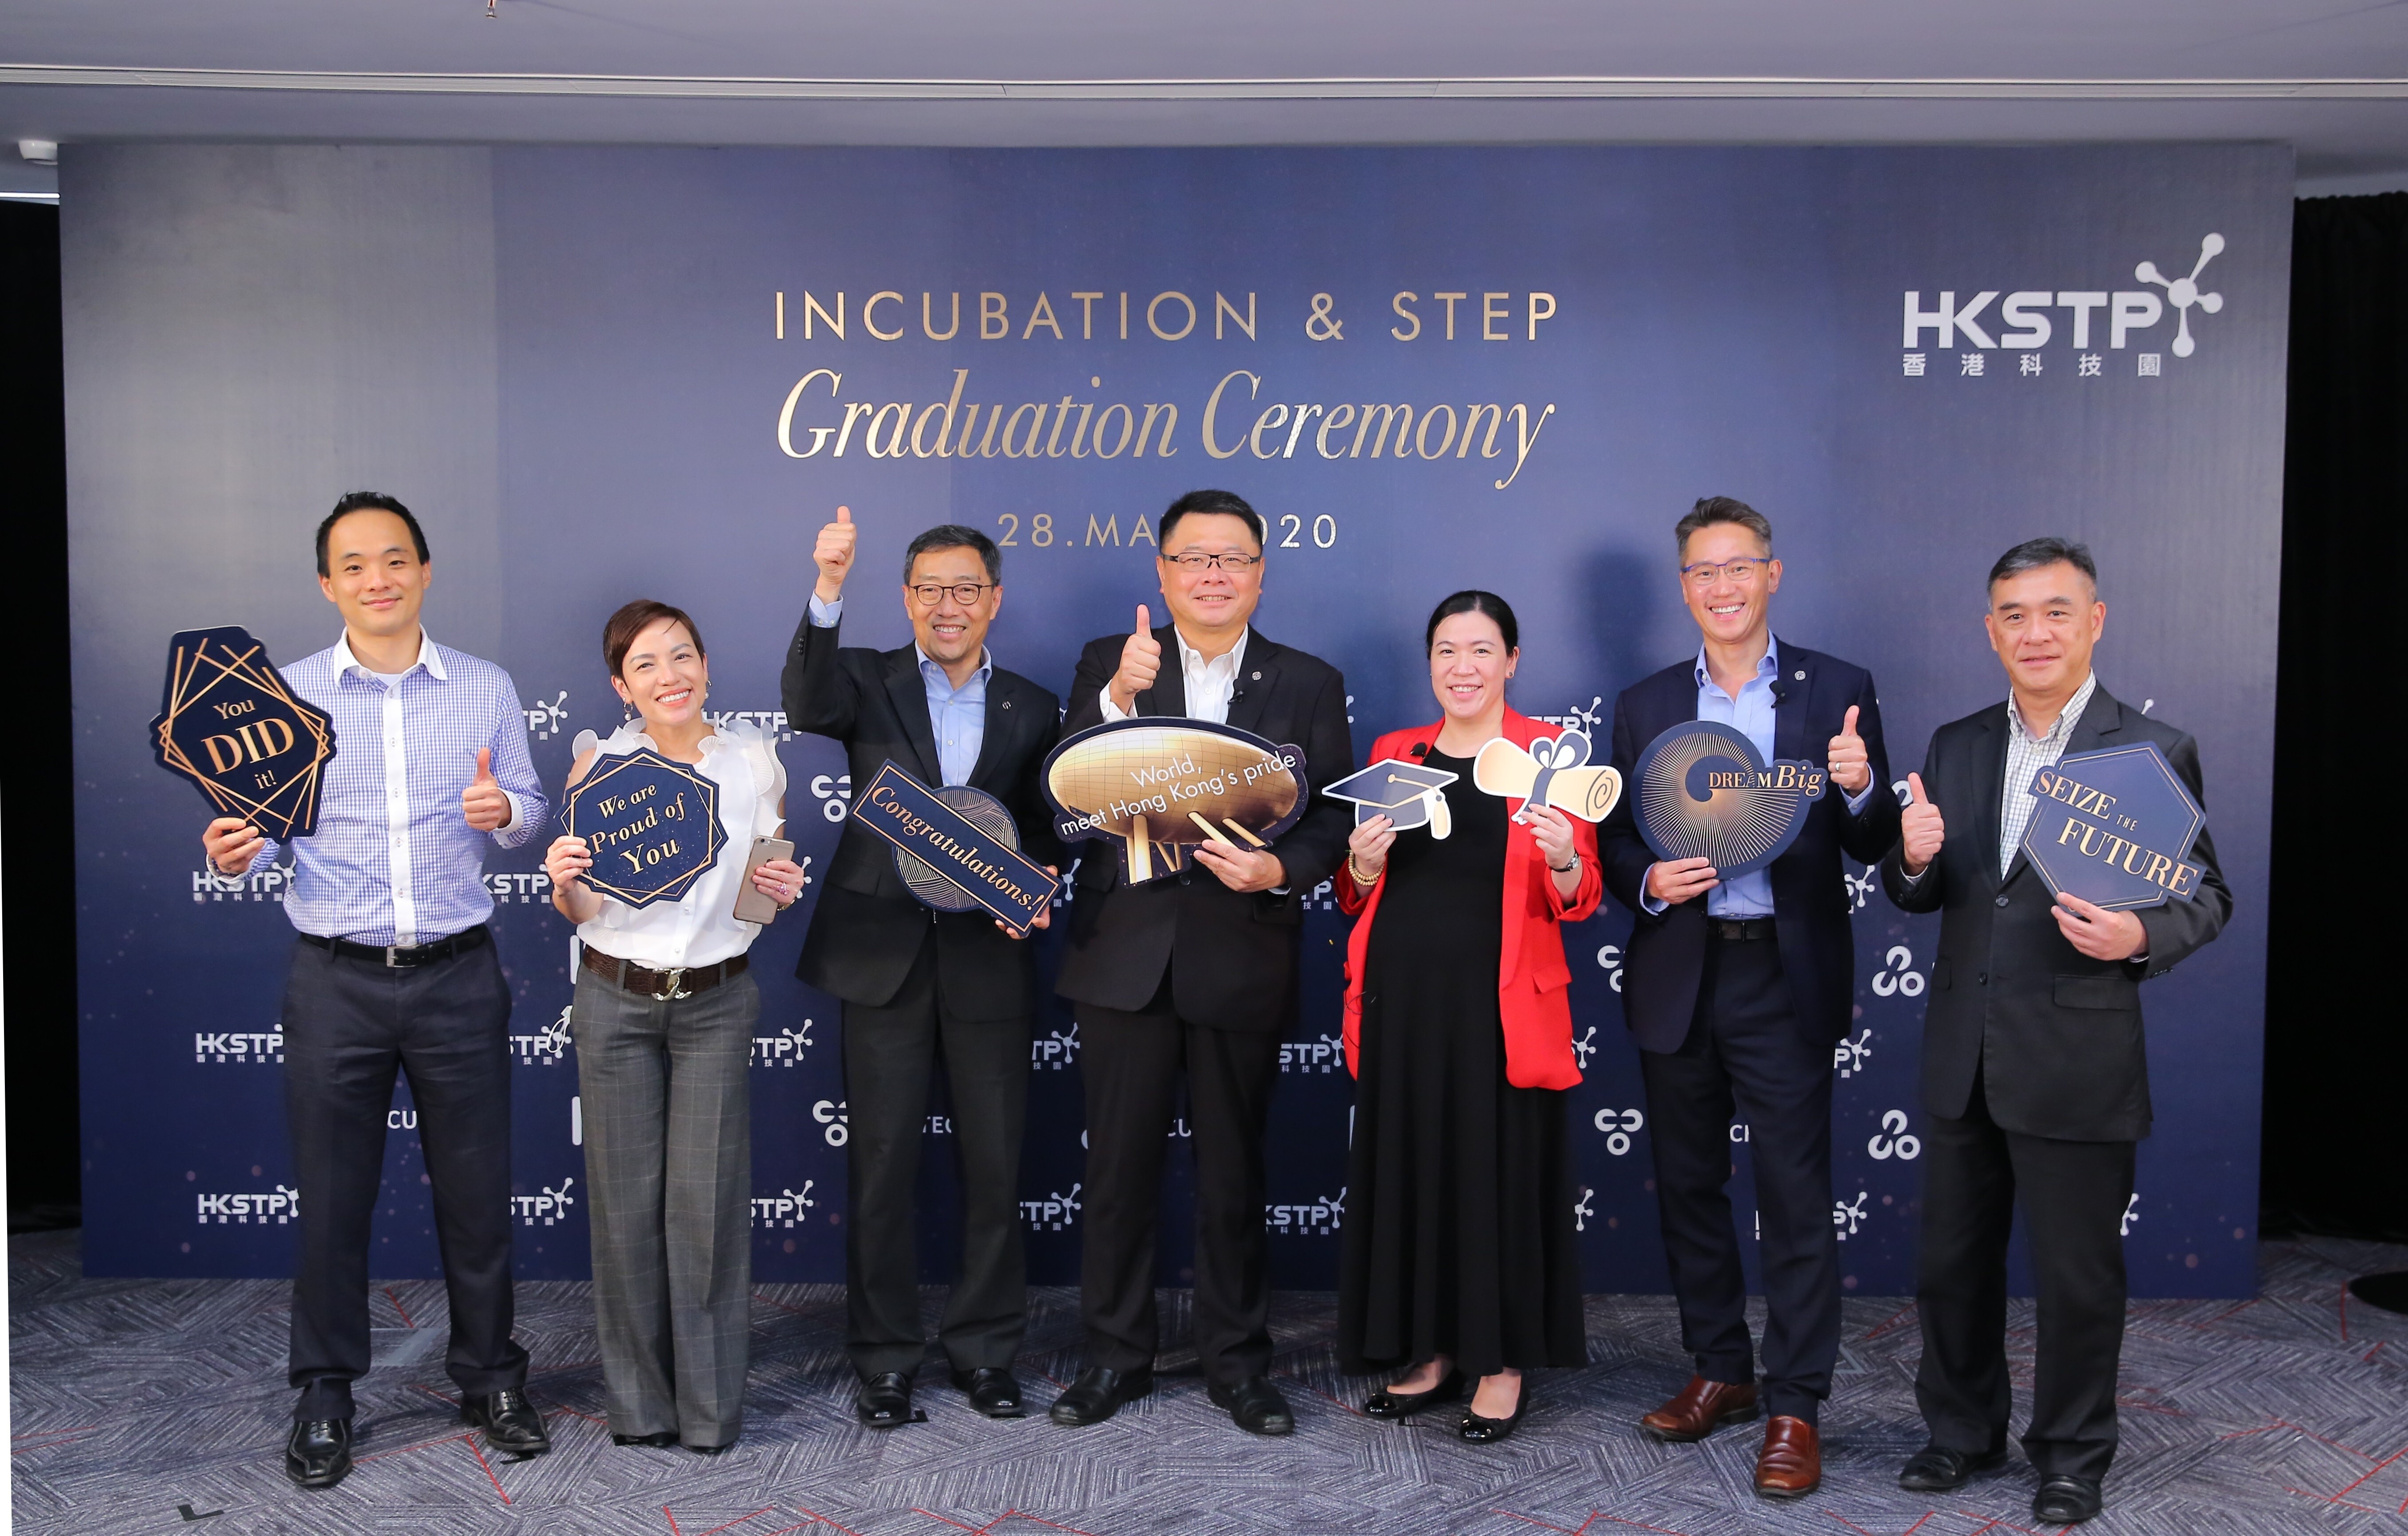 Amid the continuing Covid-19 pandemic, HKSTP held its first-ever Virtual Incubation Graduation Ceremony online to celebrate the graduation of a record 108 start-ups, with a select group of graduates present at the live event for a sharing session.